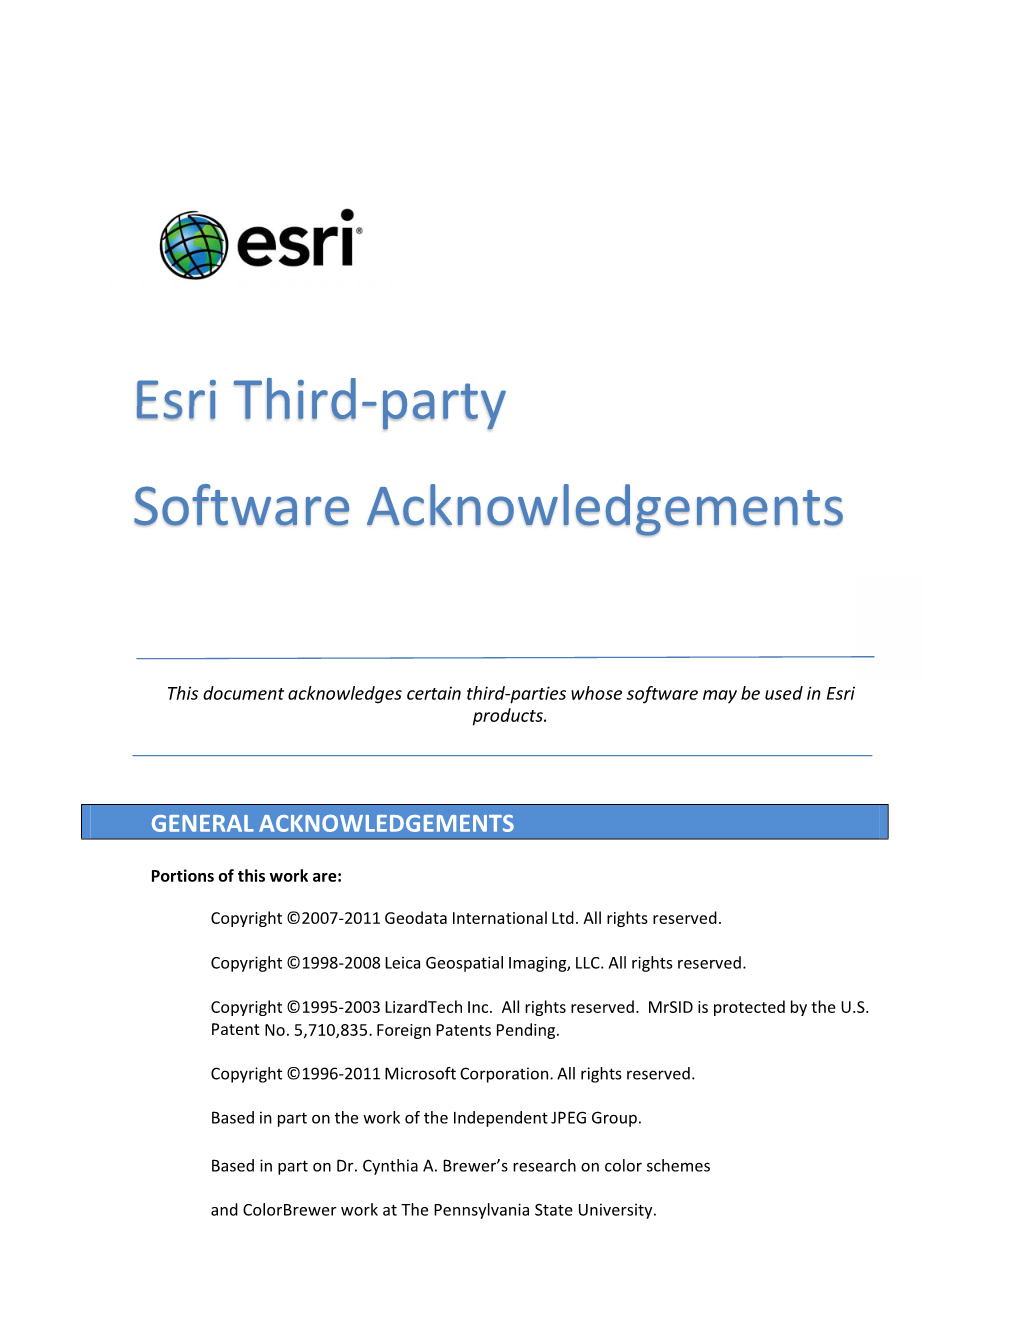 View the Arcgis Acknowledgements PDF Document